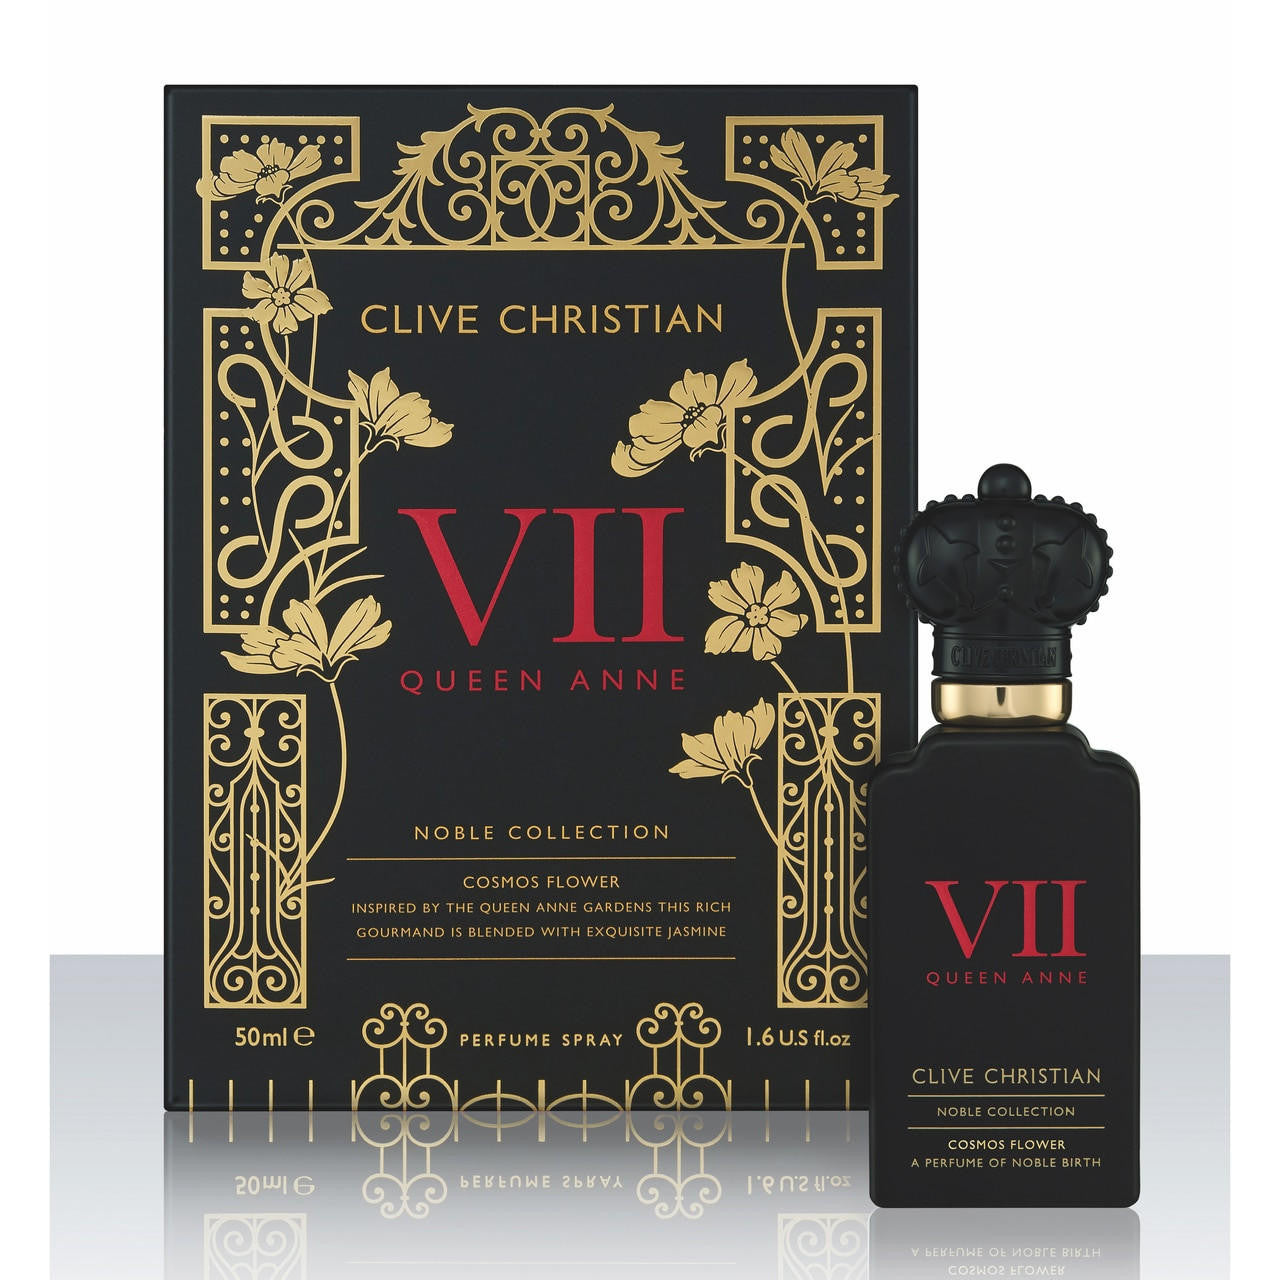  Clive Christian Noble Collection VII Cosmos Flower Parfum 